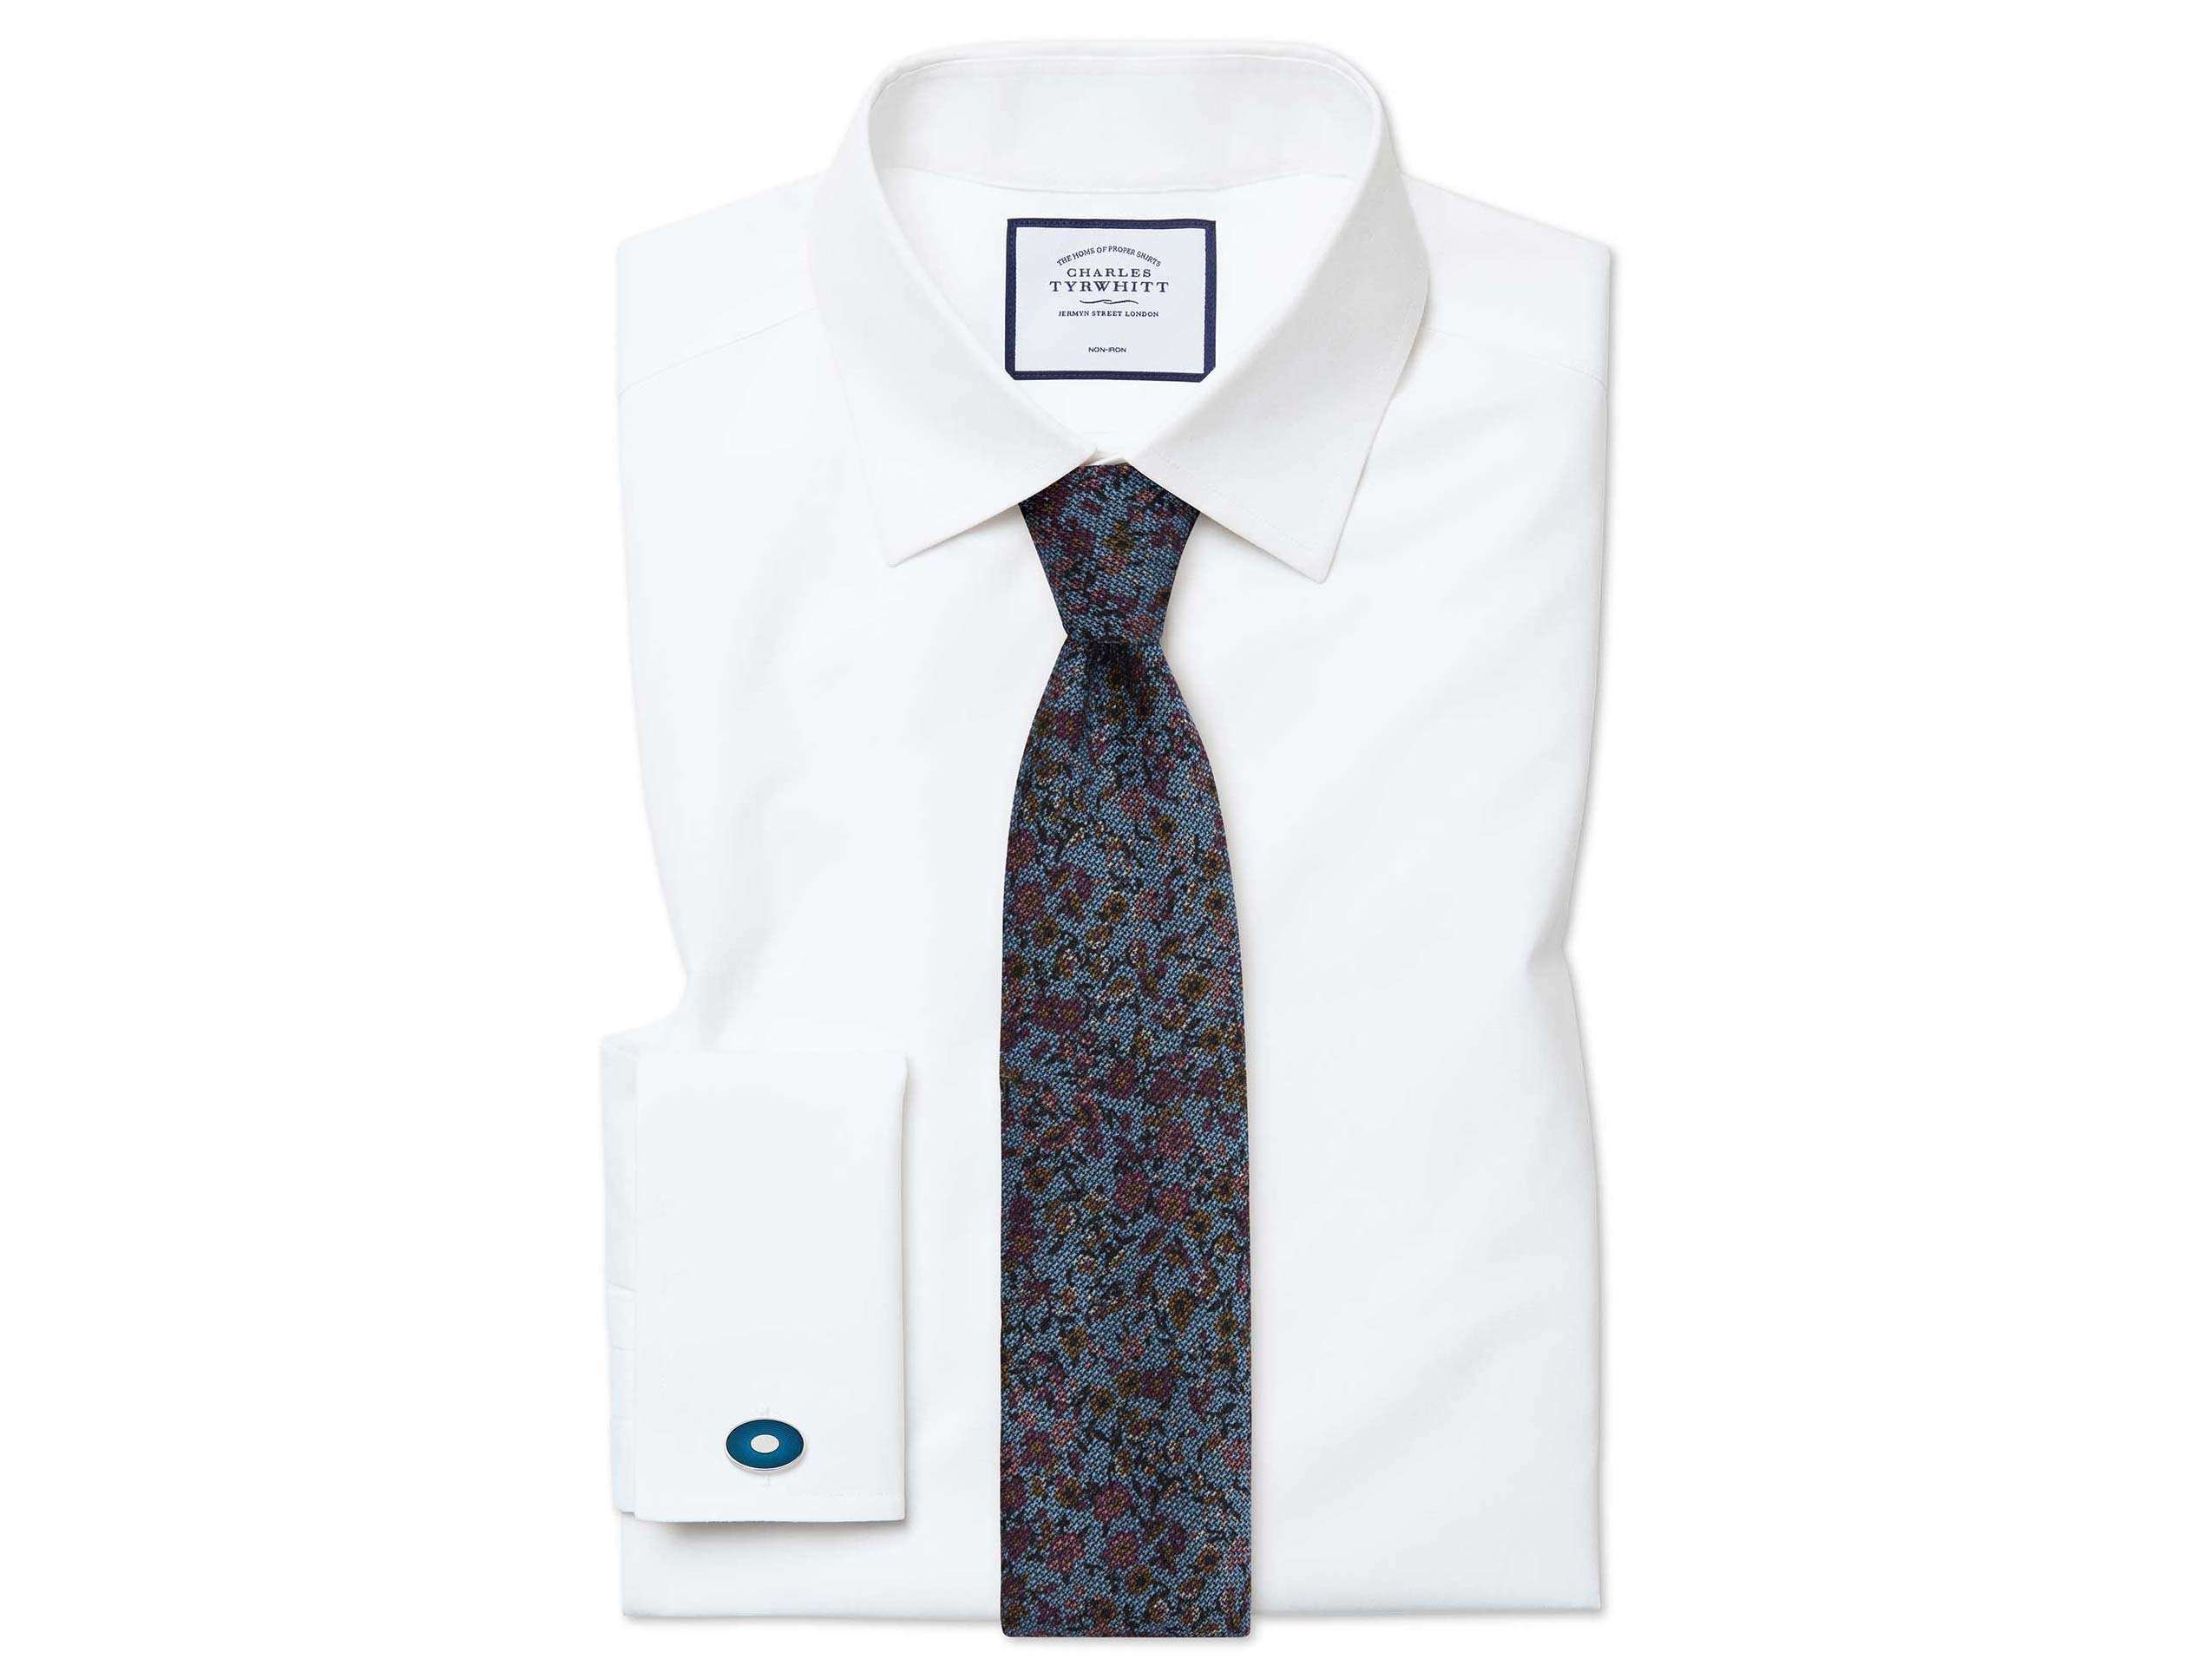 The best white dress shirts for men